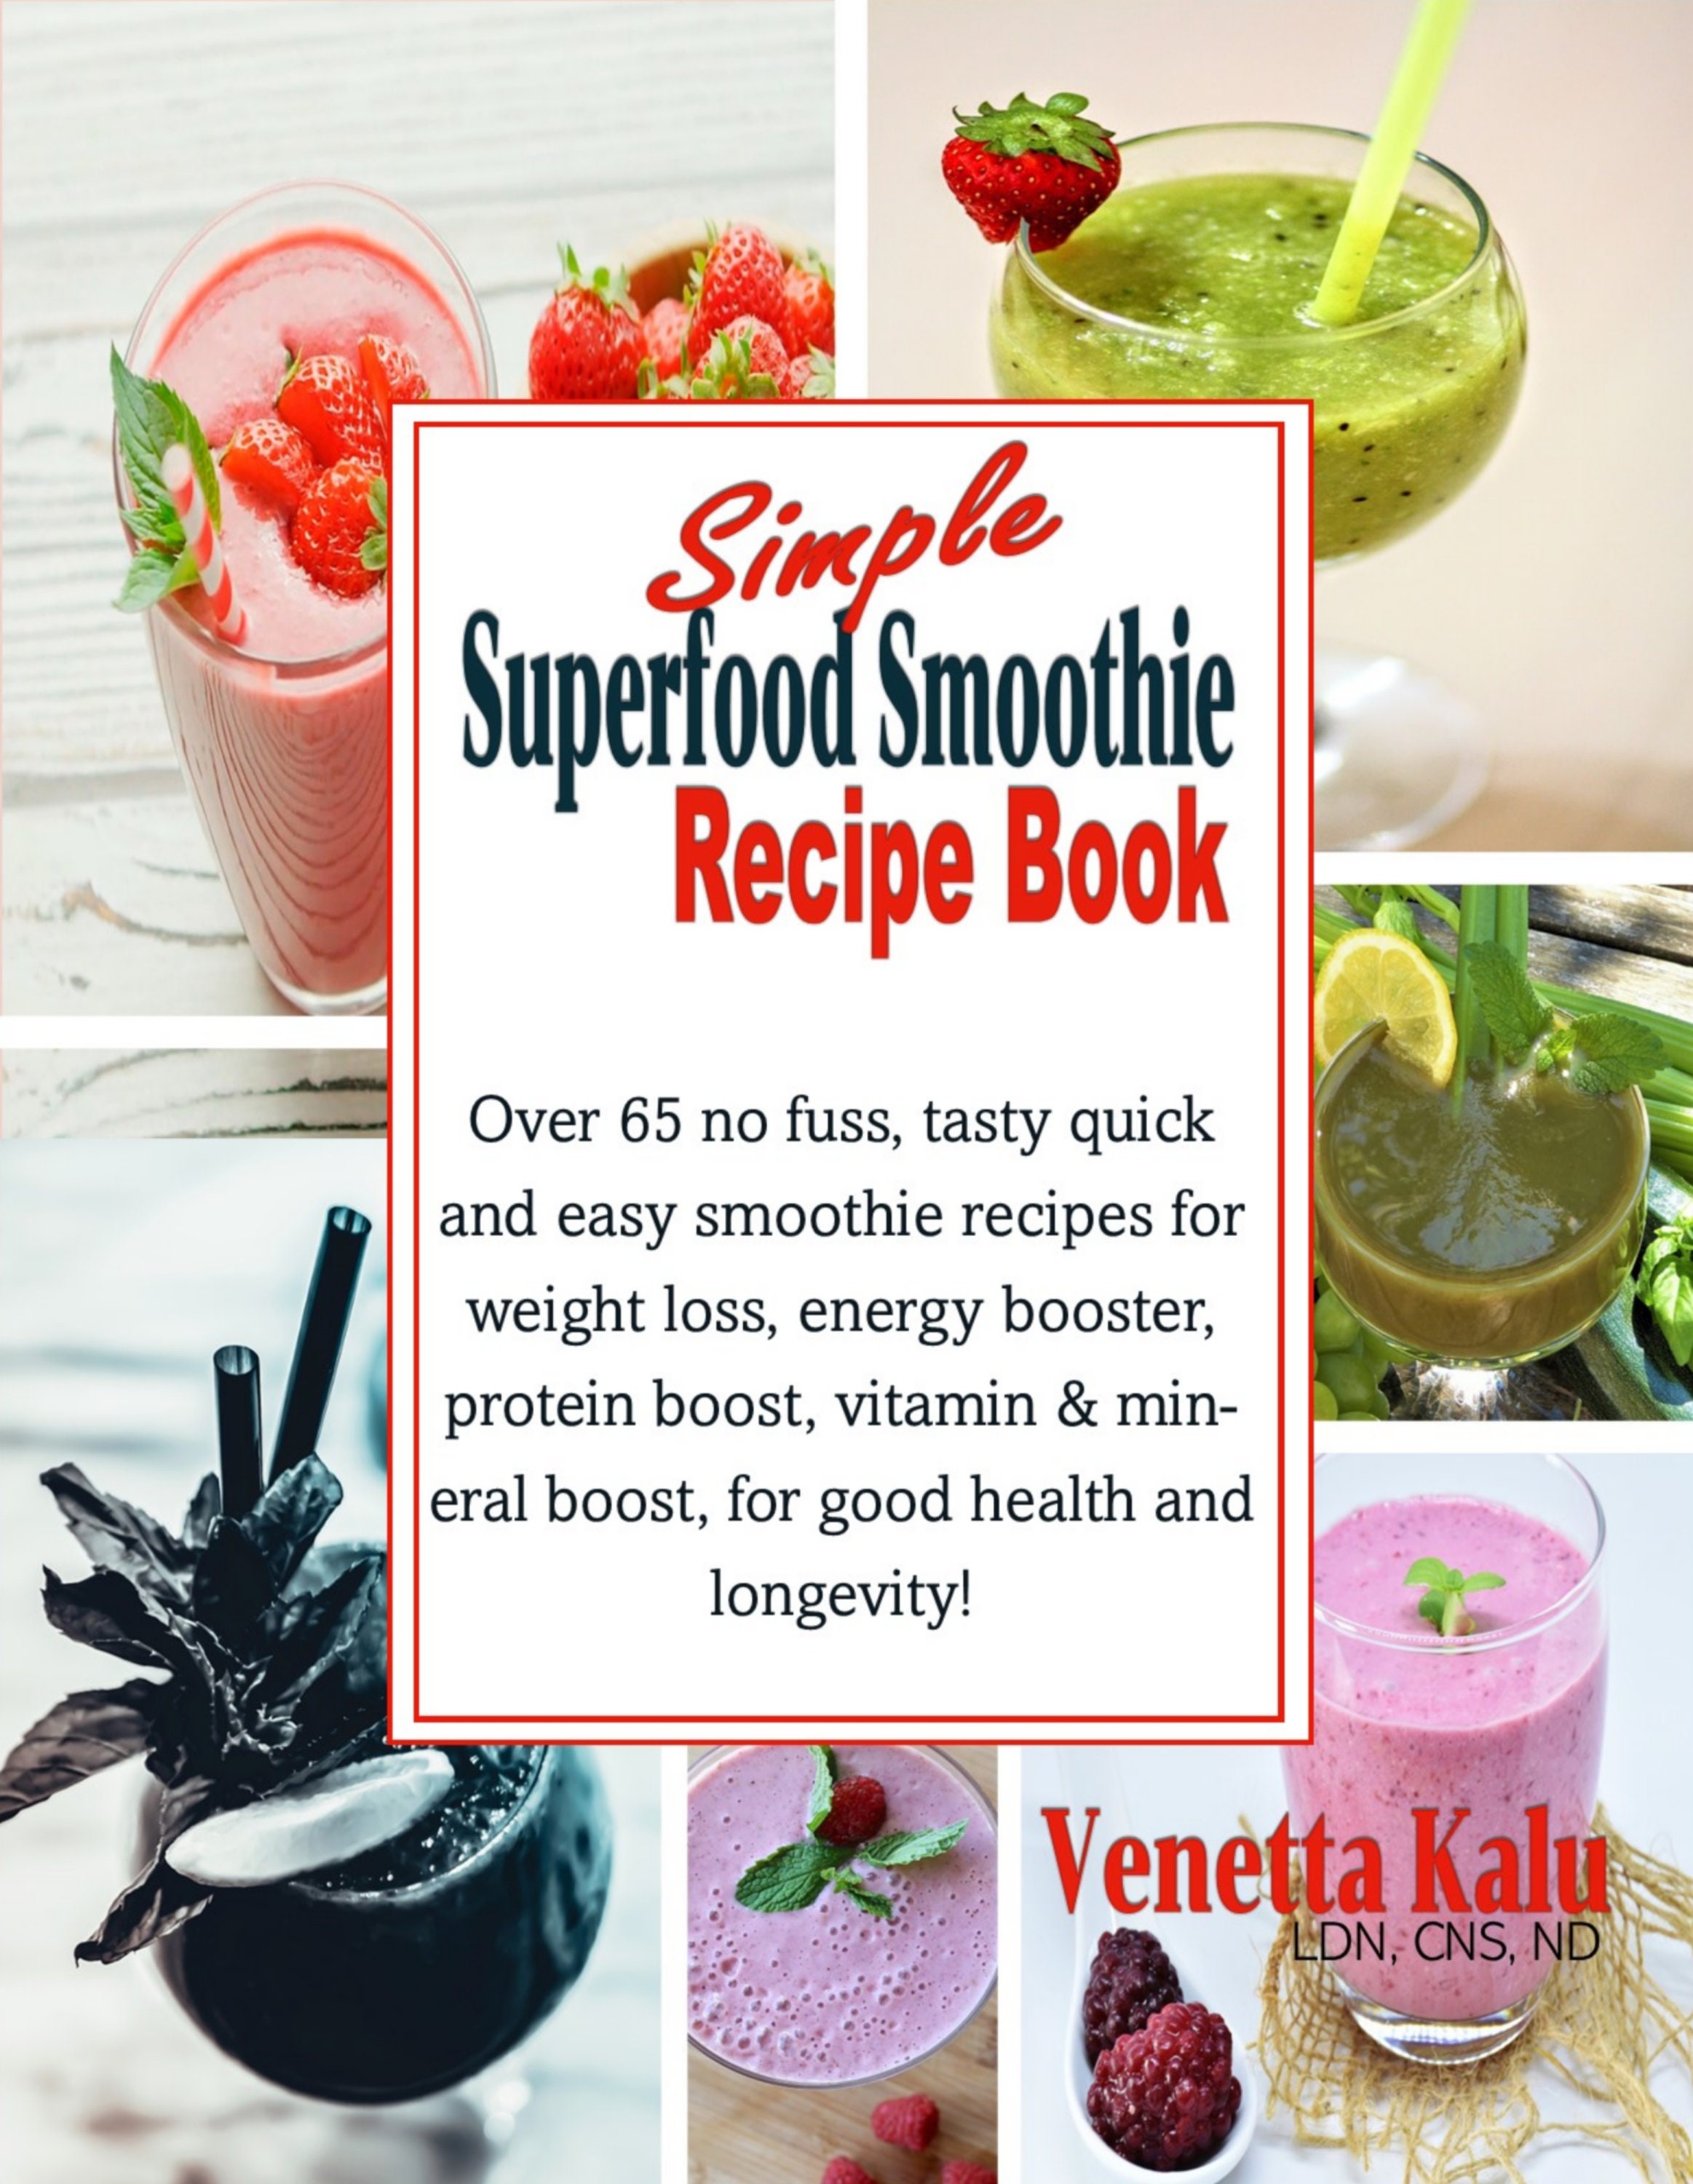 Simple Superfood Smoothie Recipe Book - Etsy